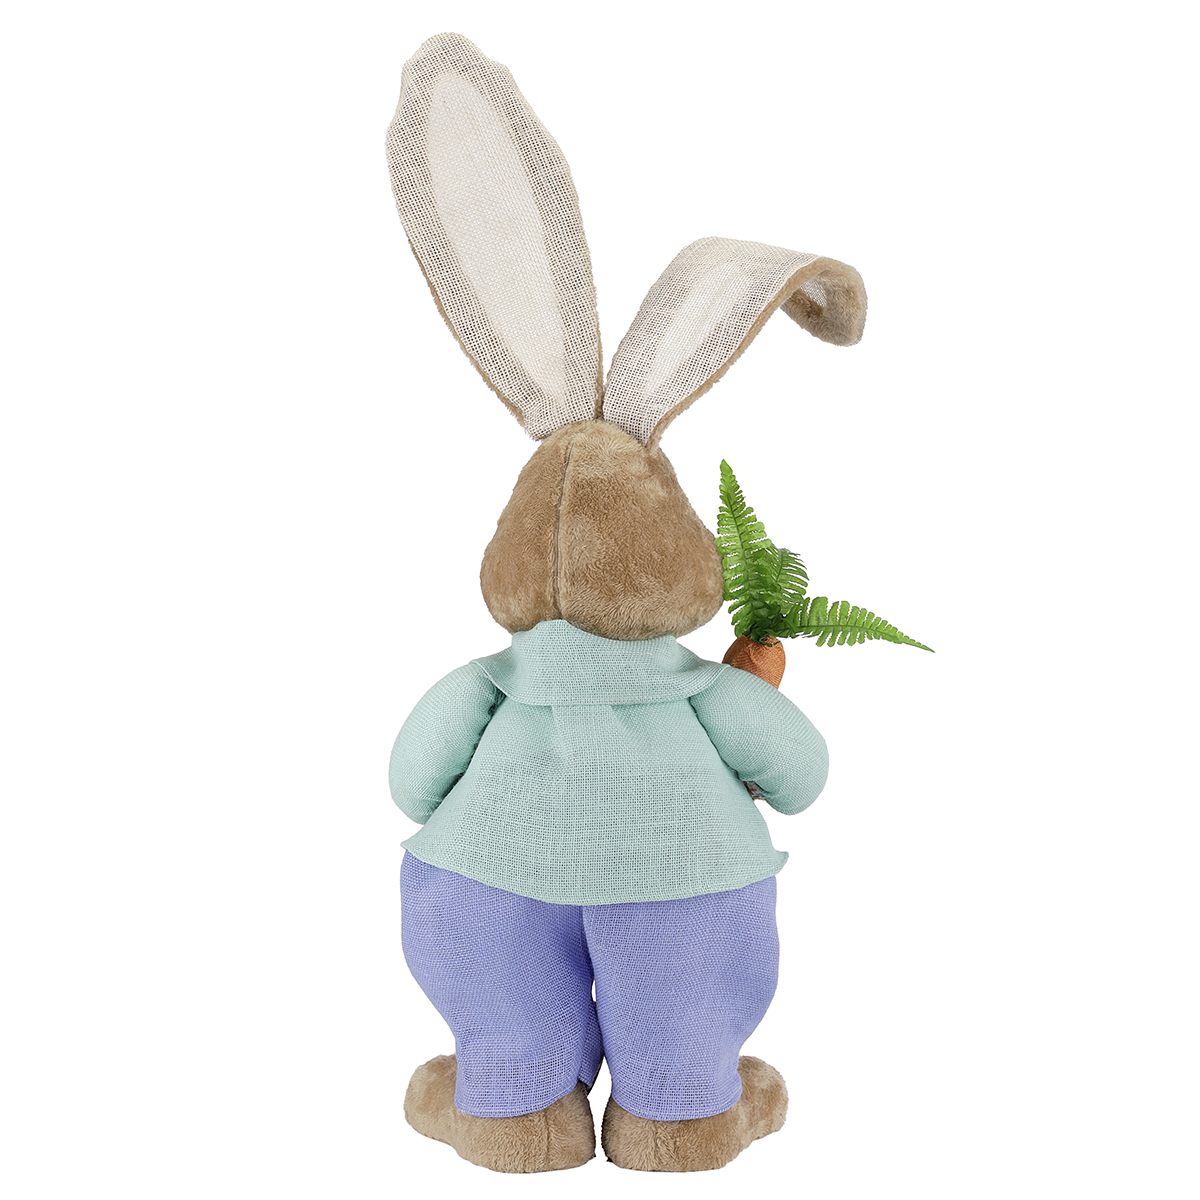 XXL Plush Easter Bunny with Carrot and Shovel 36 x 23 x 92 cm